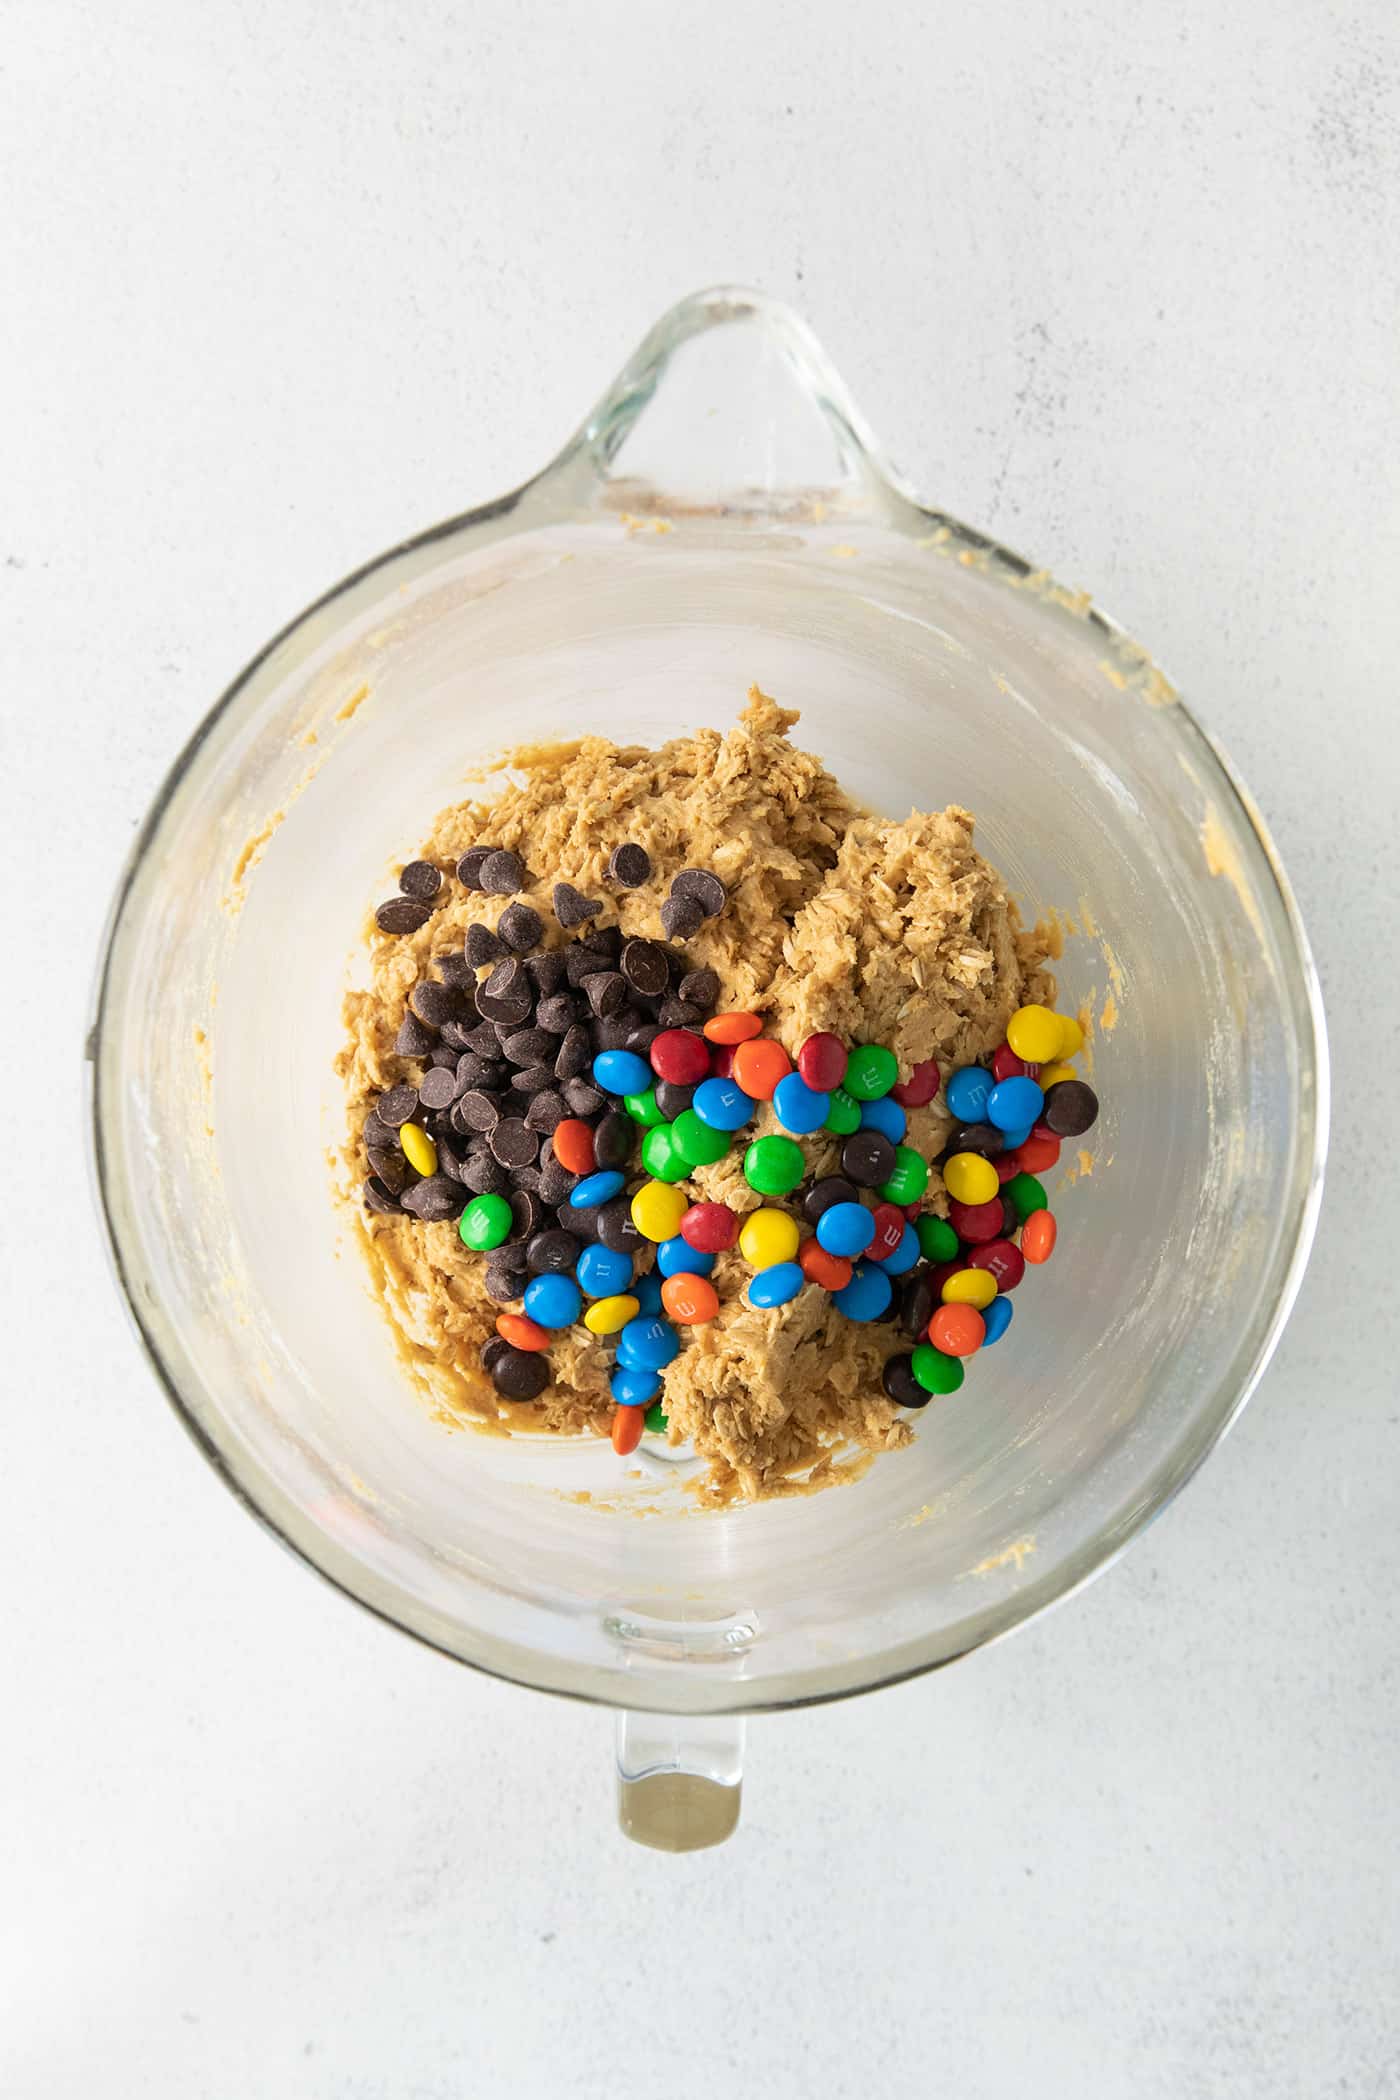 Chocolate chips and M&Ms added to cookie dough